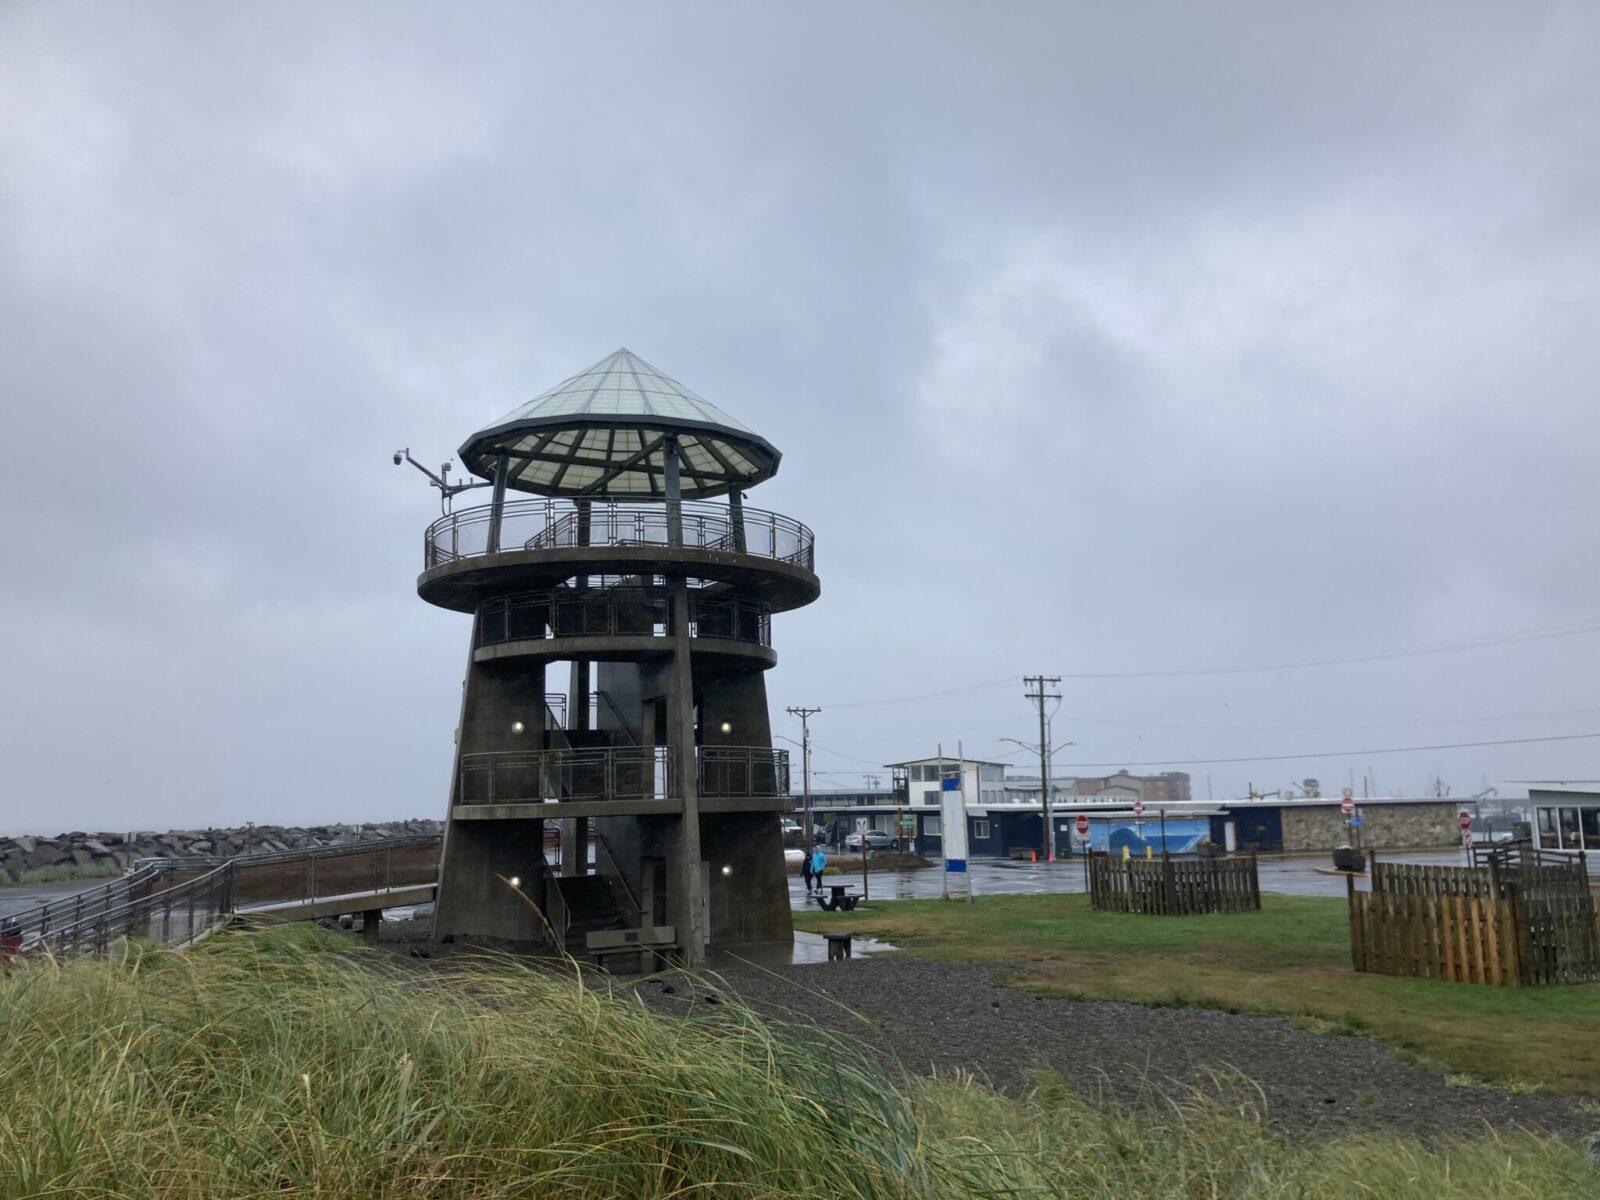 A concrete structure with stairs leading up to an observation tower on a rainy day in Westport.